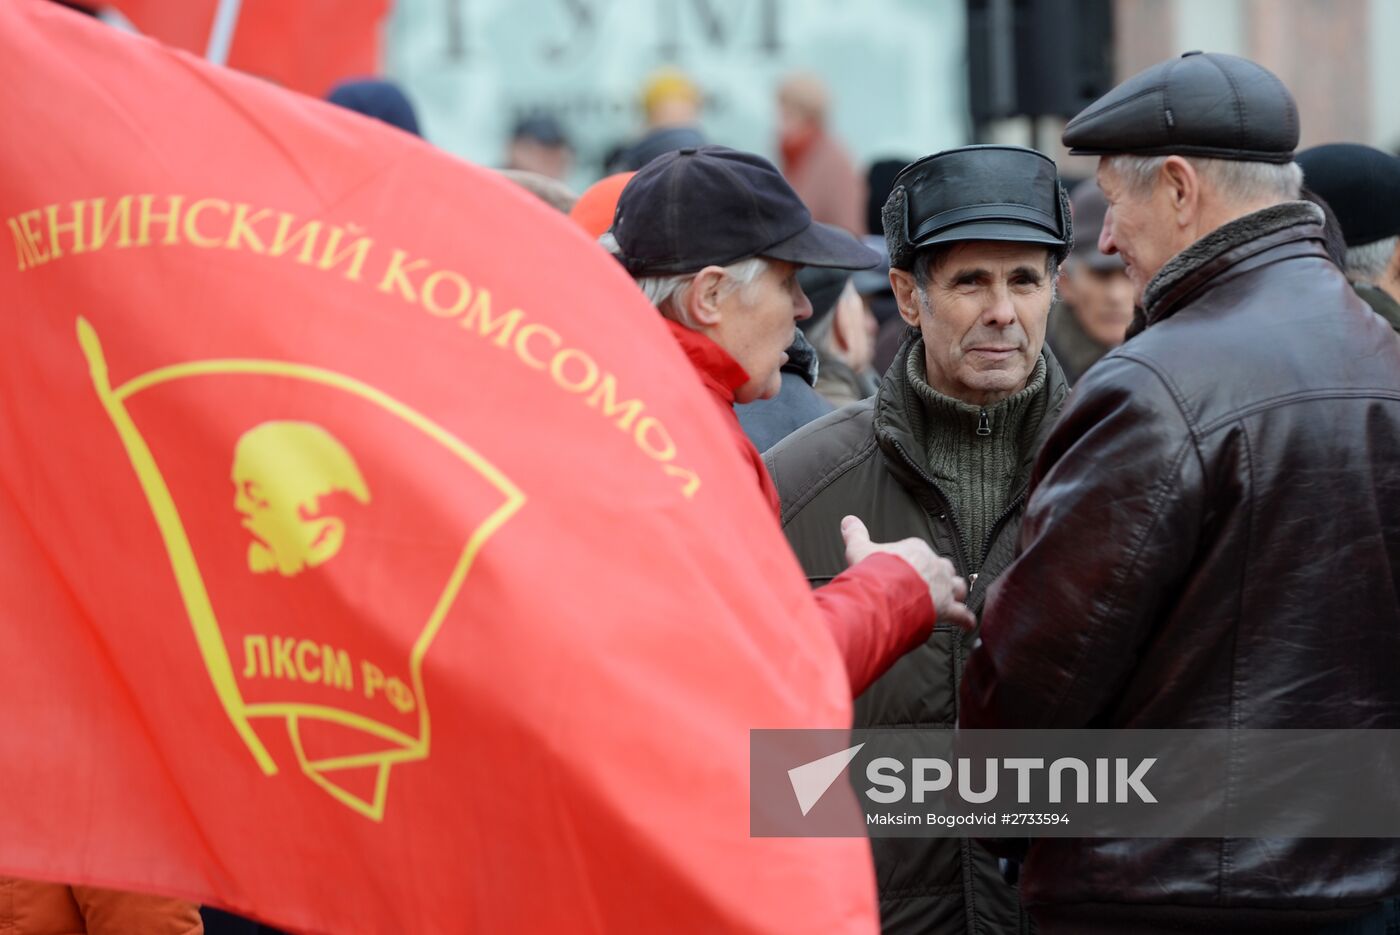 Marches and rallies mark 98th anniversary of October Revolution